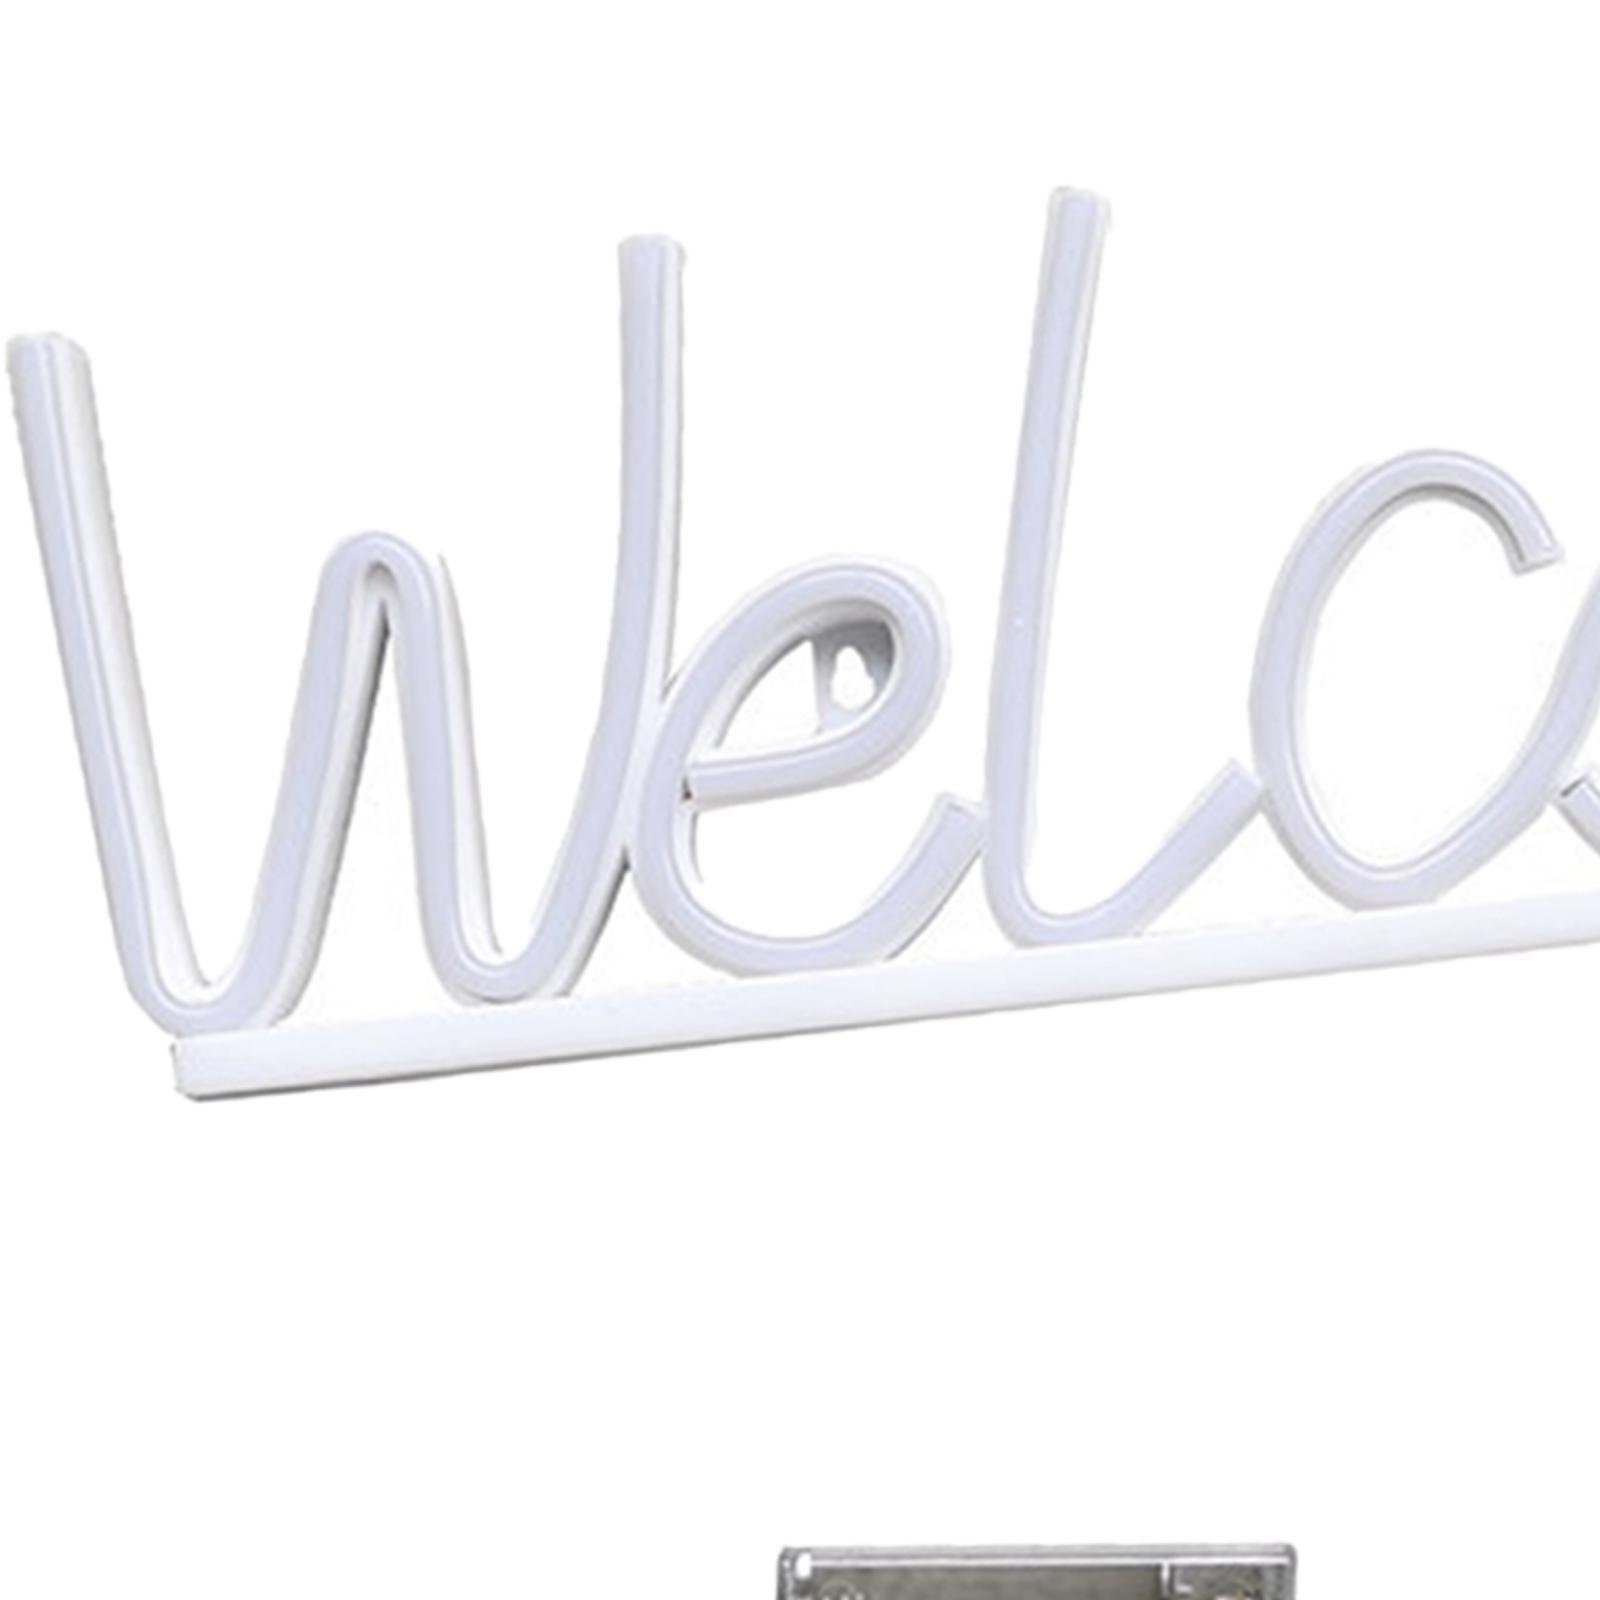 Welcome Neon Sign Decorative Lamp Neon Light Sign for Bar Pub Store